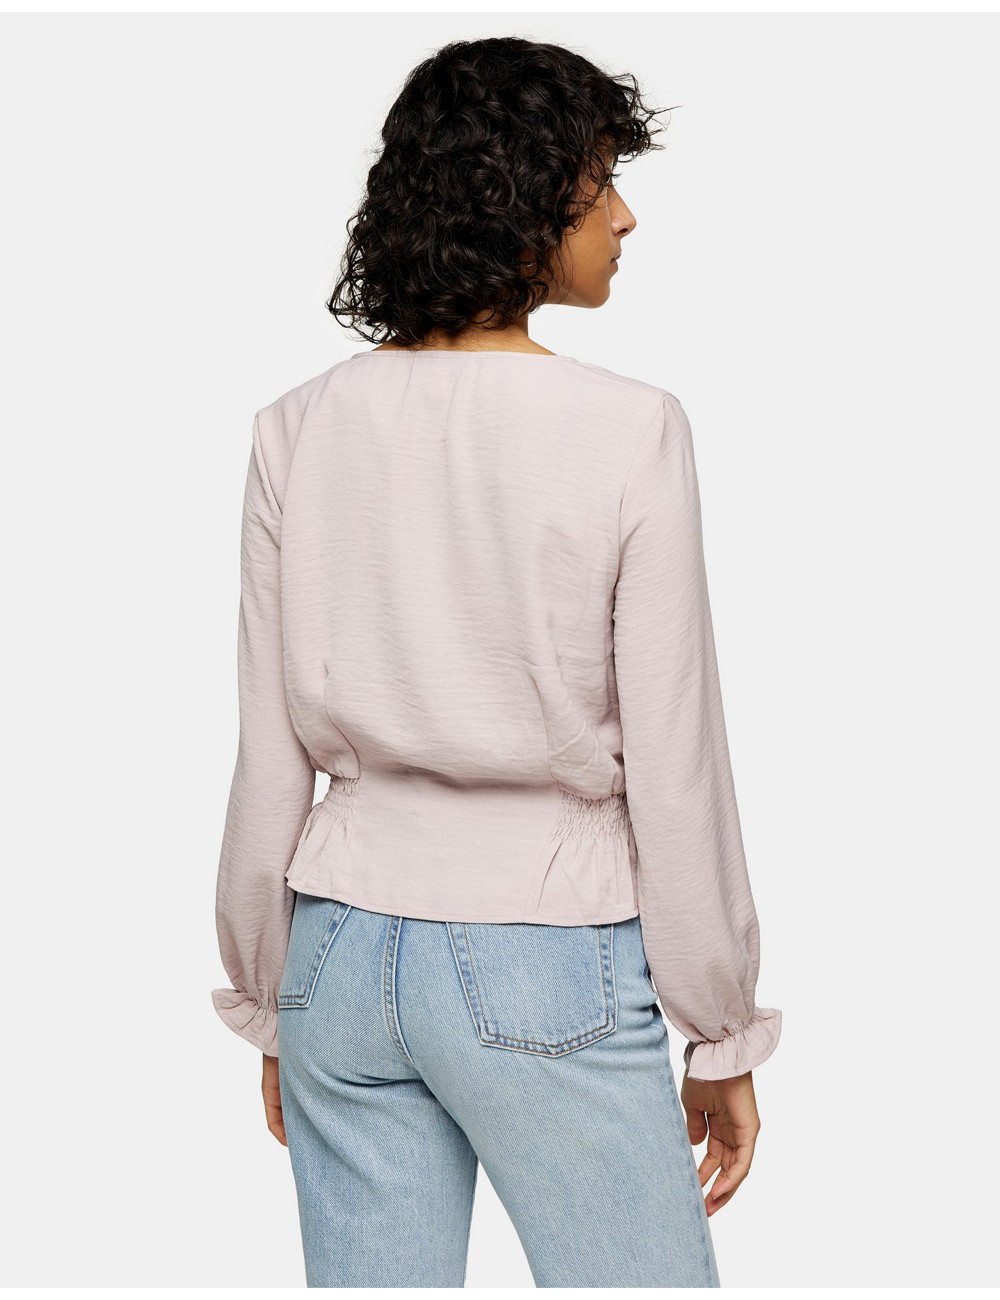 Topshop blouse in pink